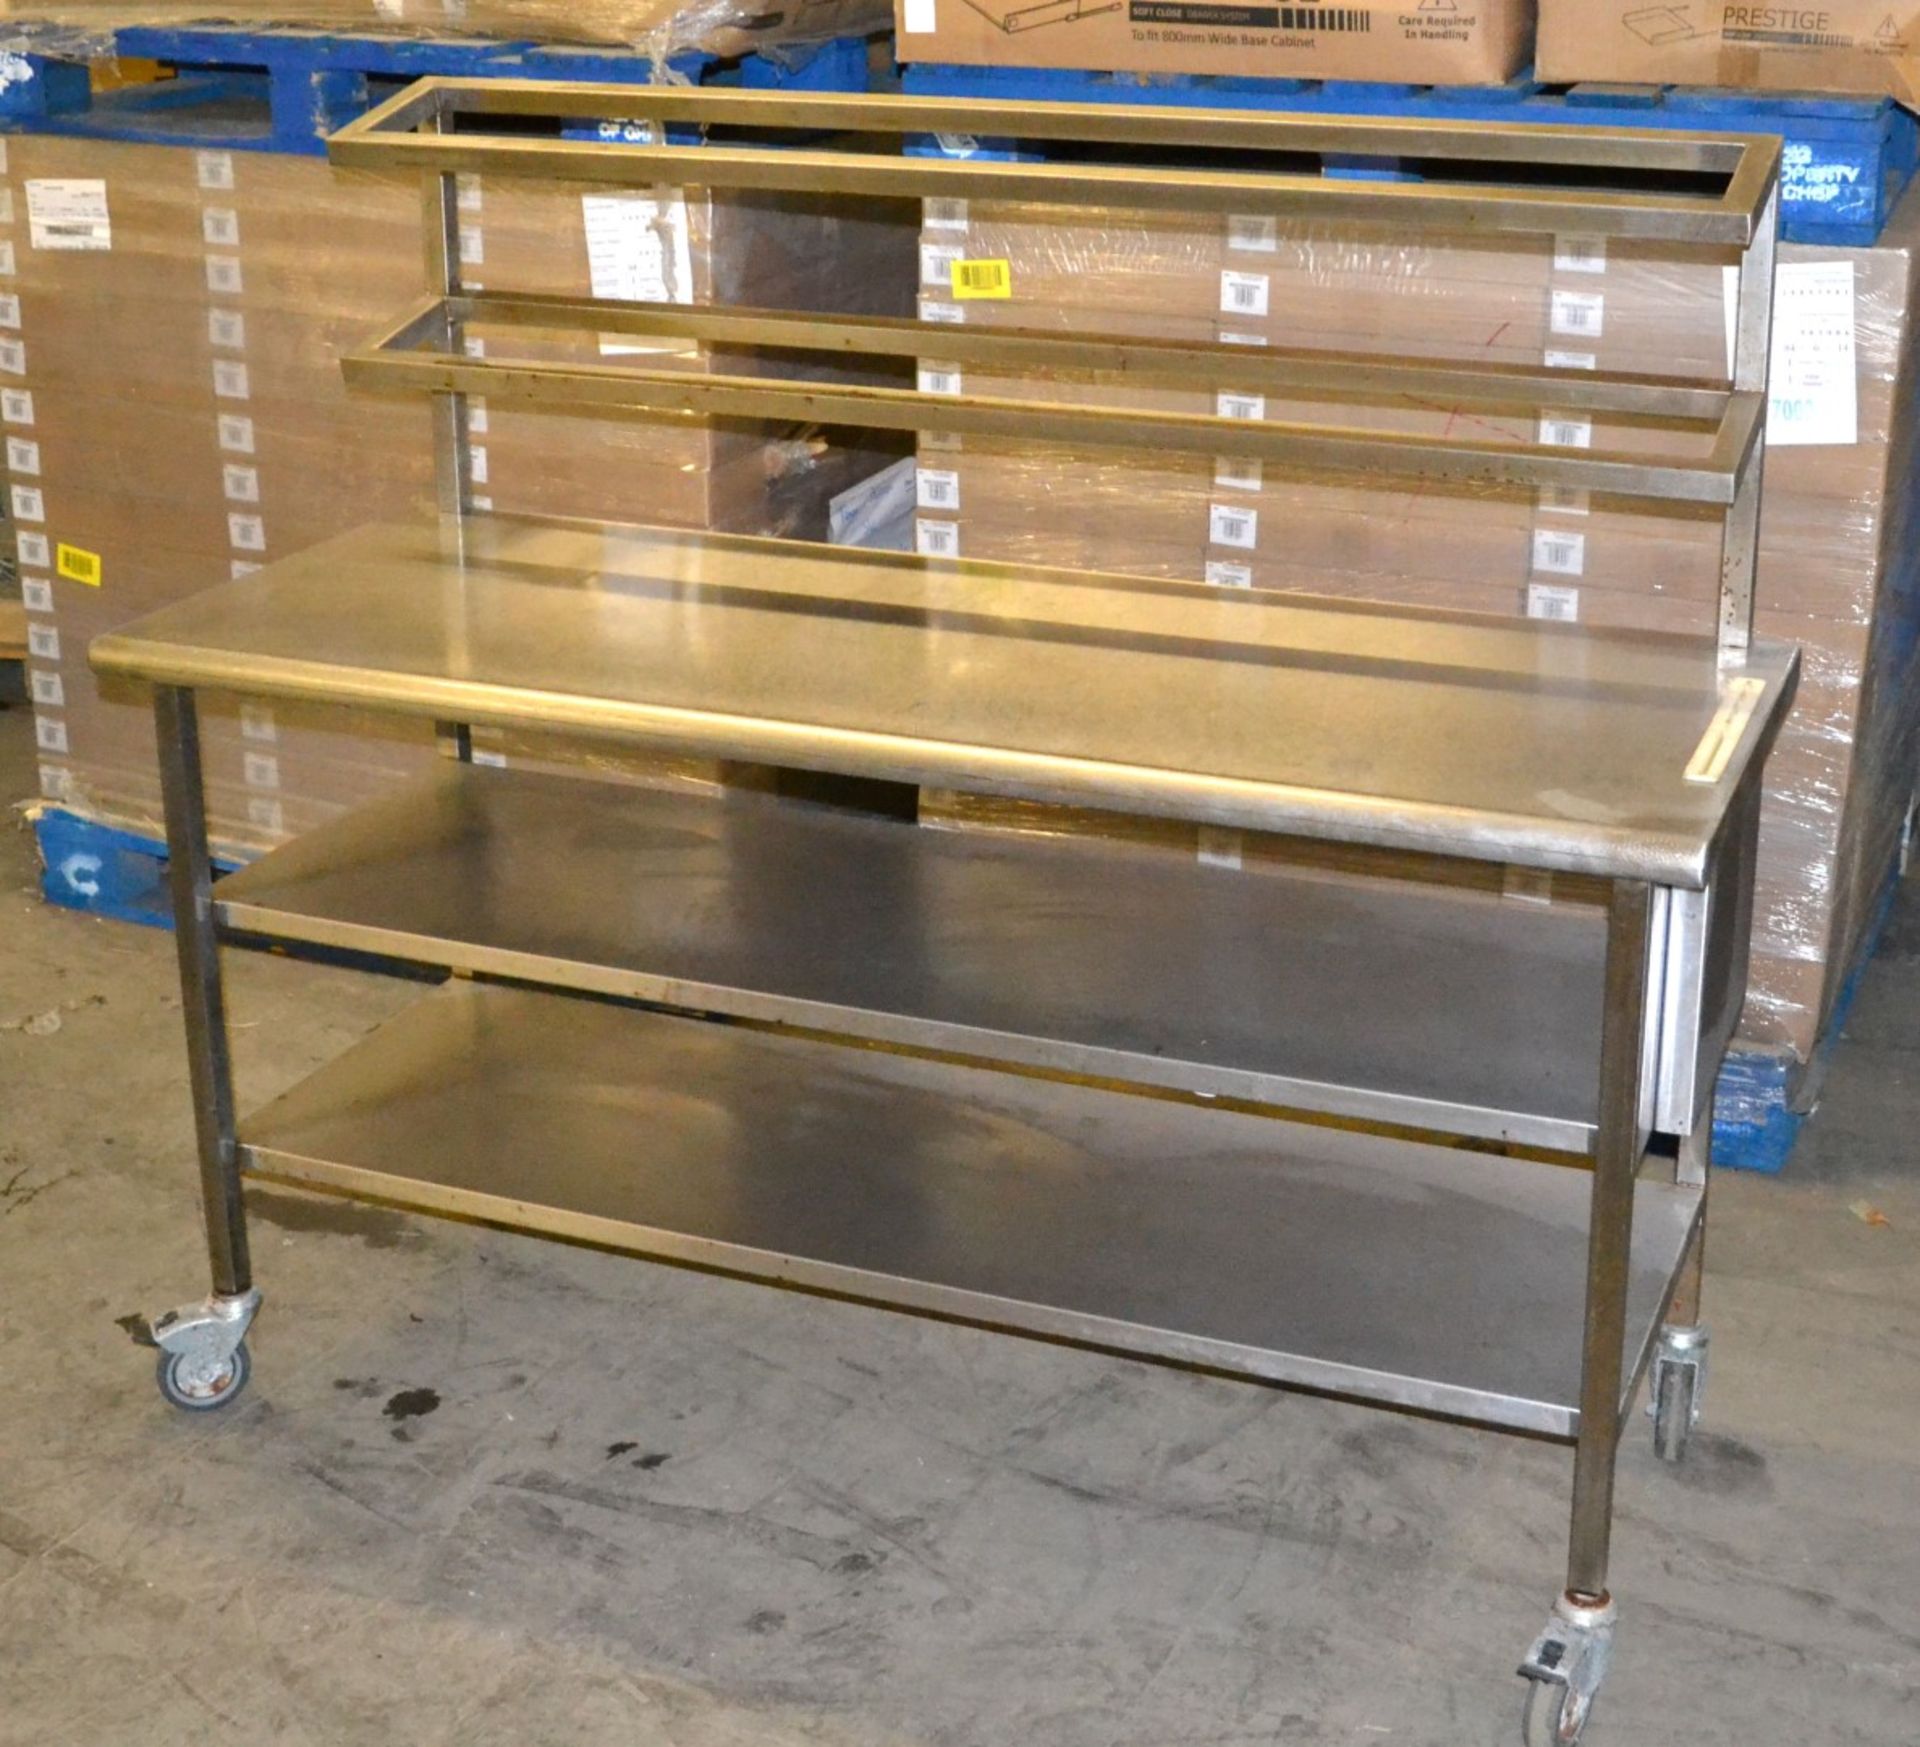 1 x Wheeled Stainless Steel Sandwich Preparation Table - Dimensions: 160 x 60 x 137.5cm - Ref: MC144 - Image 3 of 5